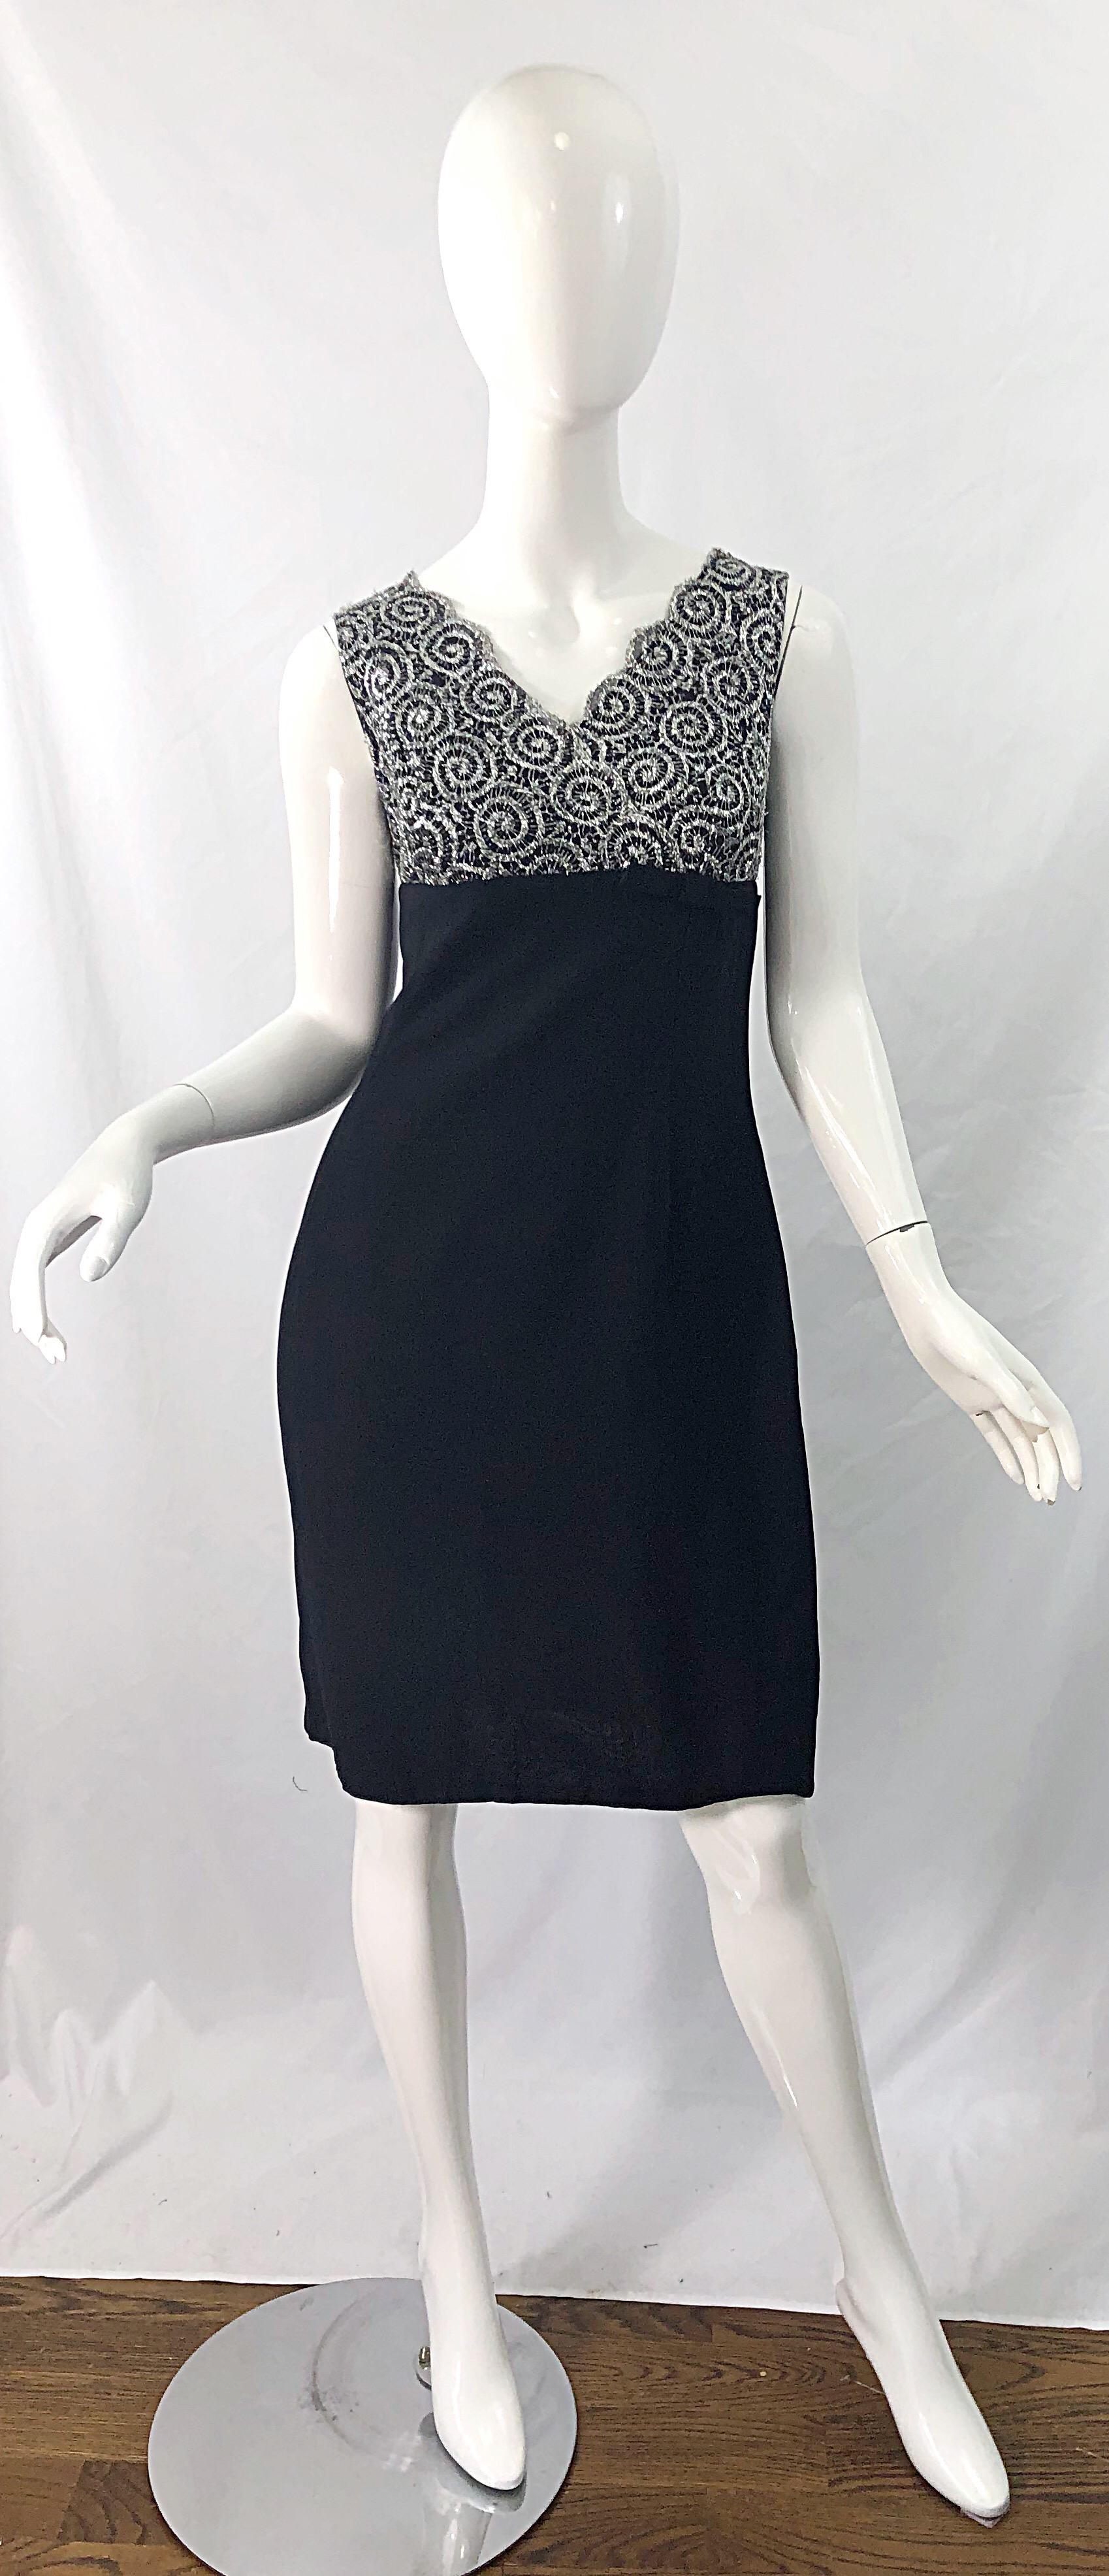 Chic 1960s black rayon crepe and silver metallic lace vintage sheath dress ! Features an empire style waist with bow at side left waist. Swag detail at center back. Full metal zipper up the back with hook-and-eye closure. The perfect little black